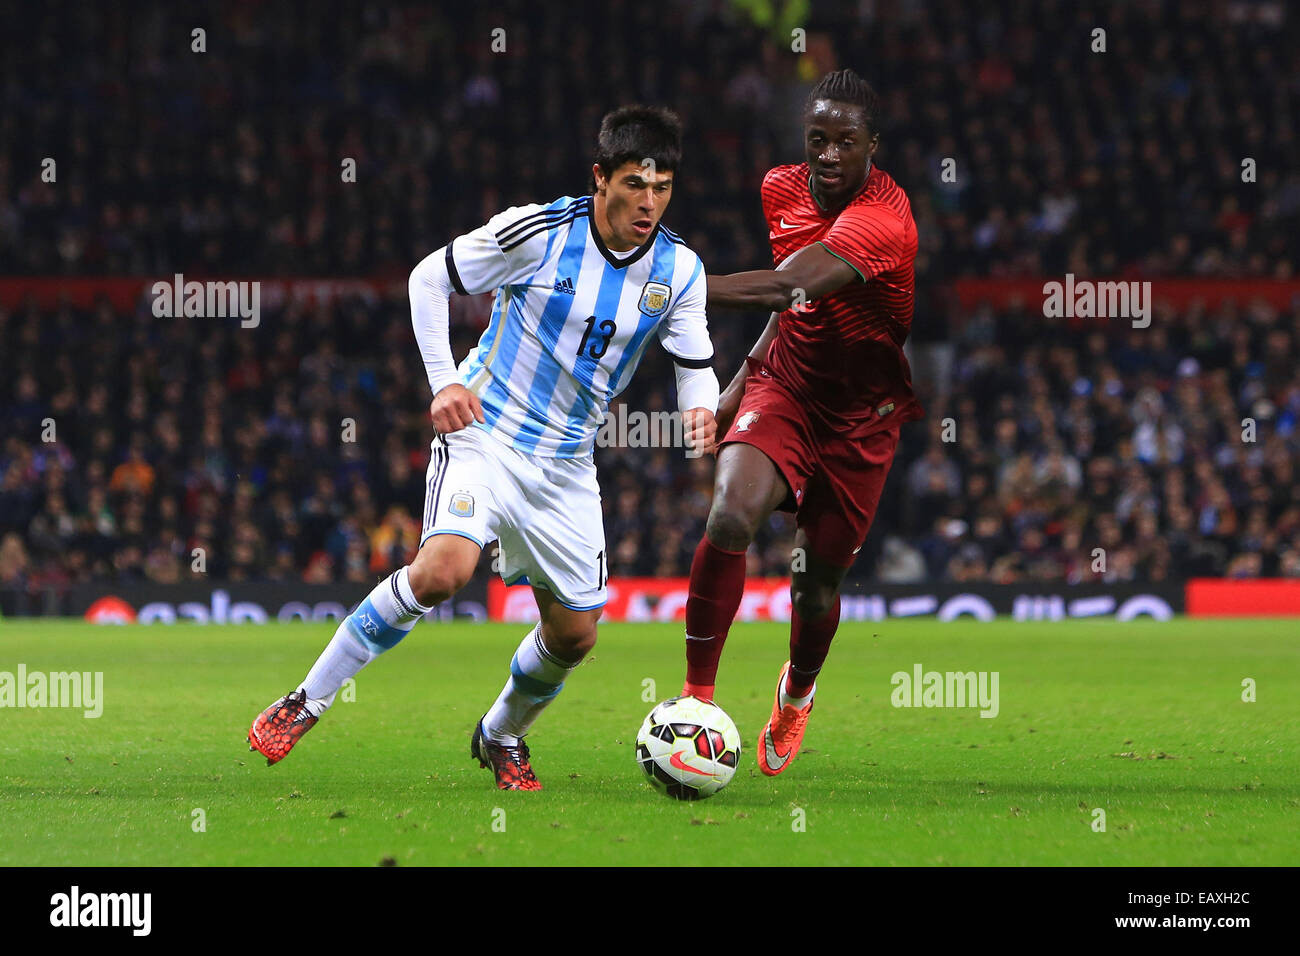 Manchester, UK. 18th Nov, 2014. Facundo Roncaglia of Argentina and Eder of Portugal - Argentina vs. Portugal - International Friendly - Old Trafford - Manchester - 18/11/2014 Pic Philip Oldham/Sportimage © csm/Alamy Live News Stock Photo